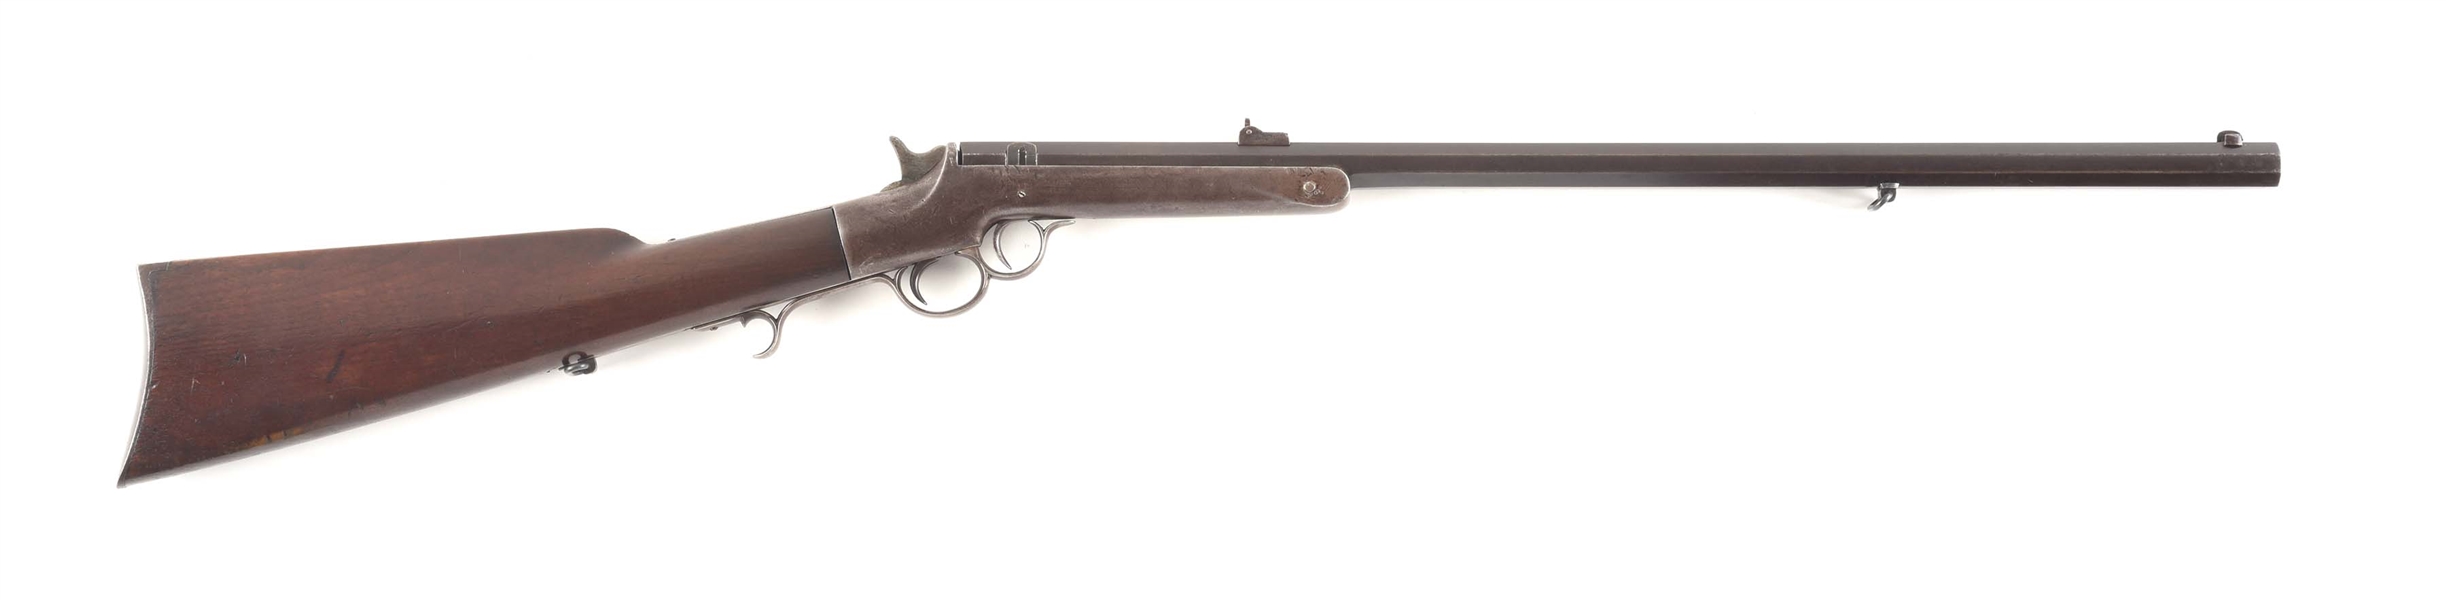 (A) KITTREDGE & CO. MARKED MILITARY CARBINE.